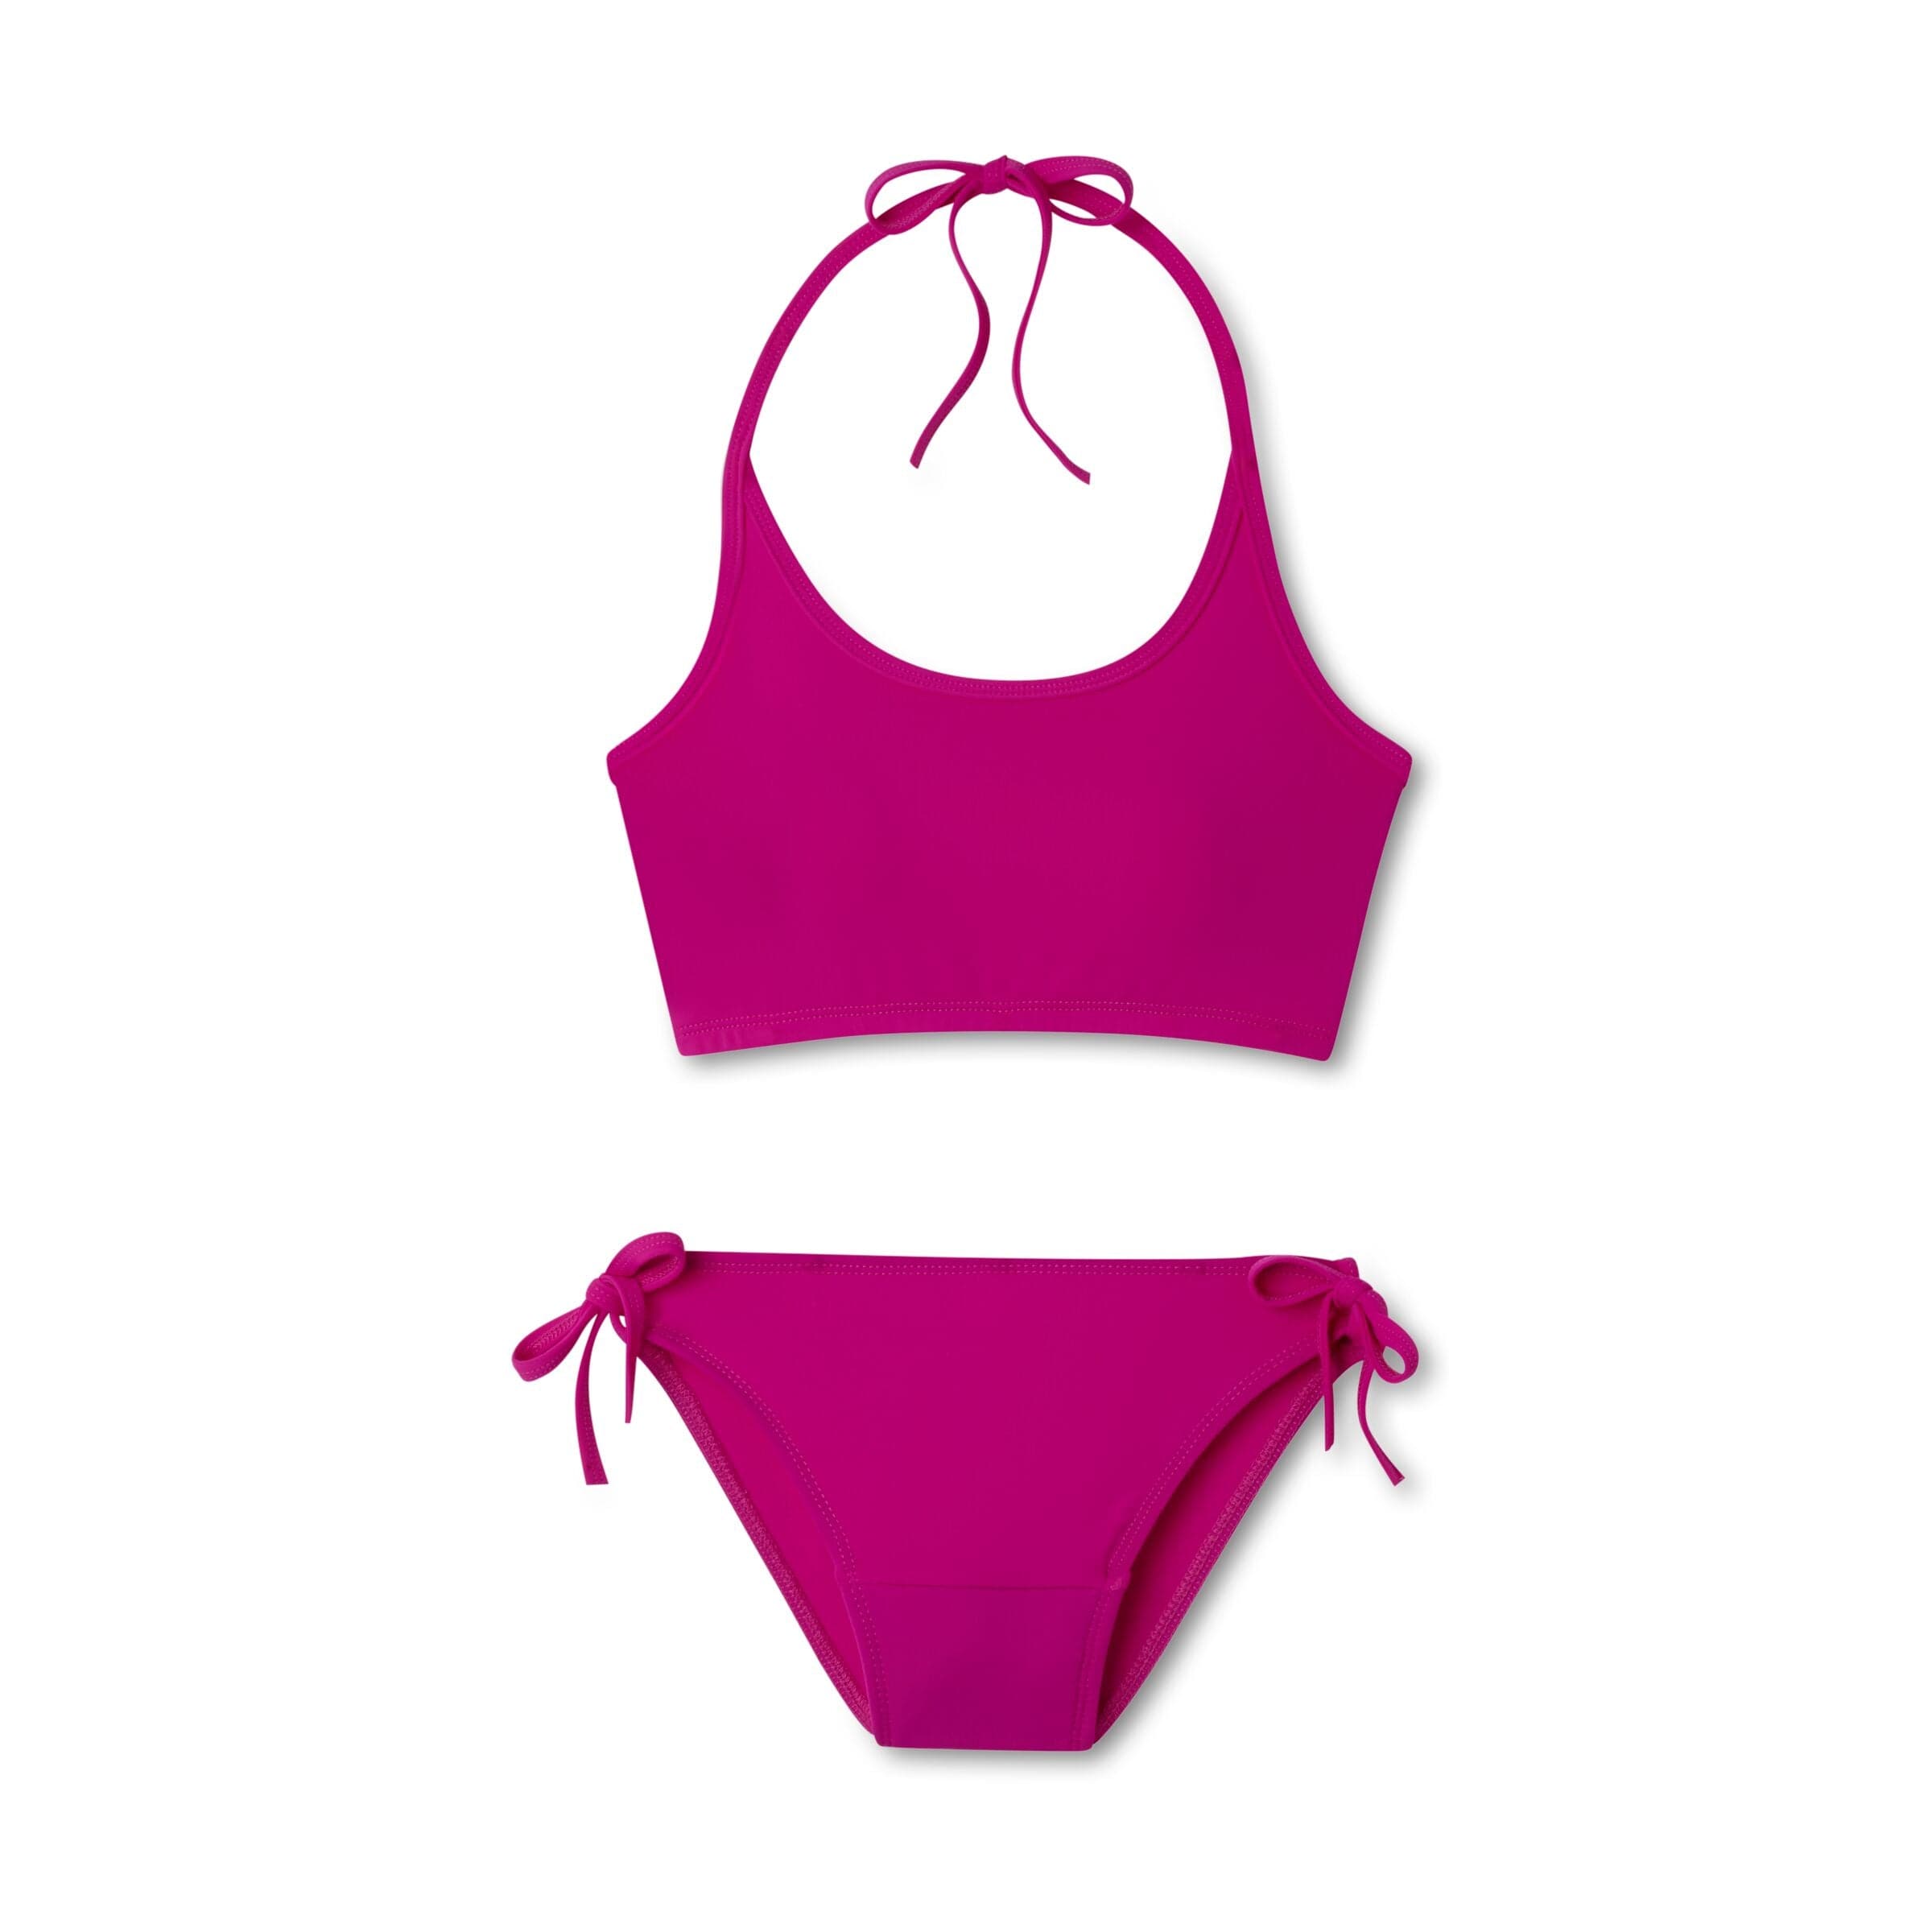 Ruby Love - Nothing we ❤️ more than period proof swimwear! Our swimwear can  hold up to 3 tampons worth of flow so your beach days can be filled with  fun!⁠